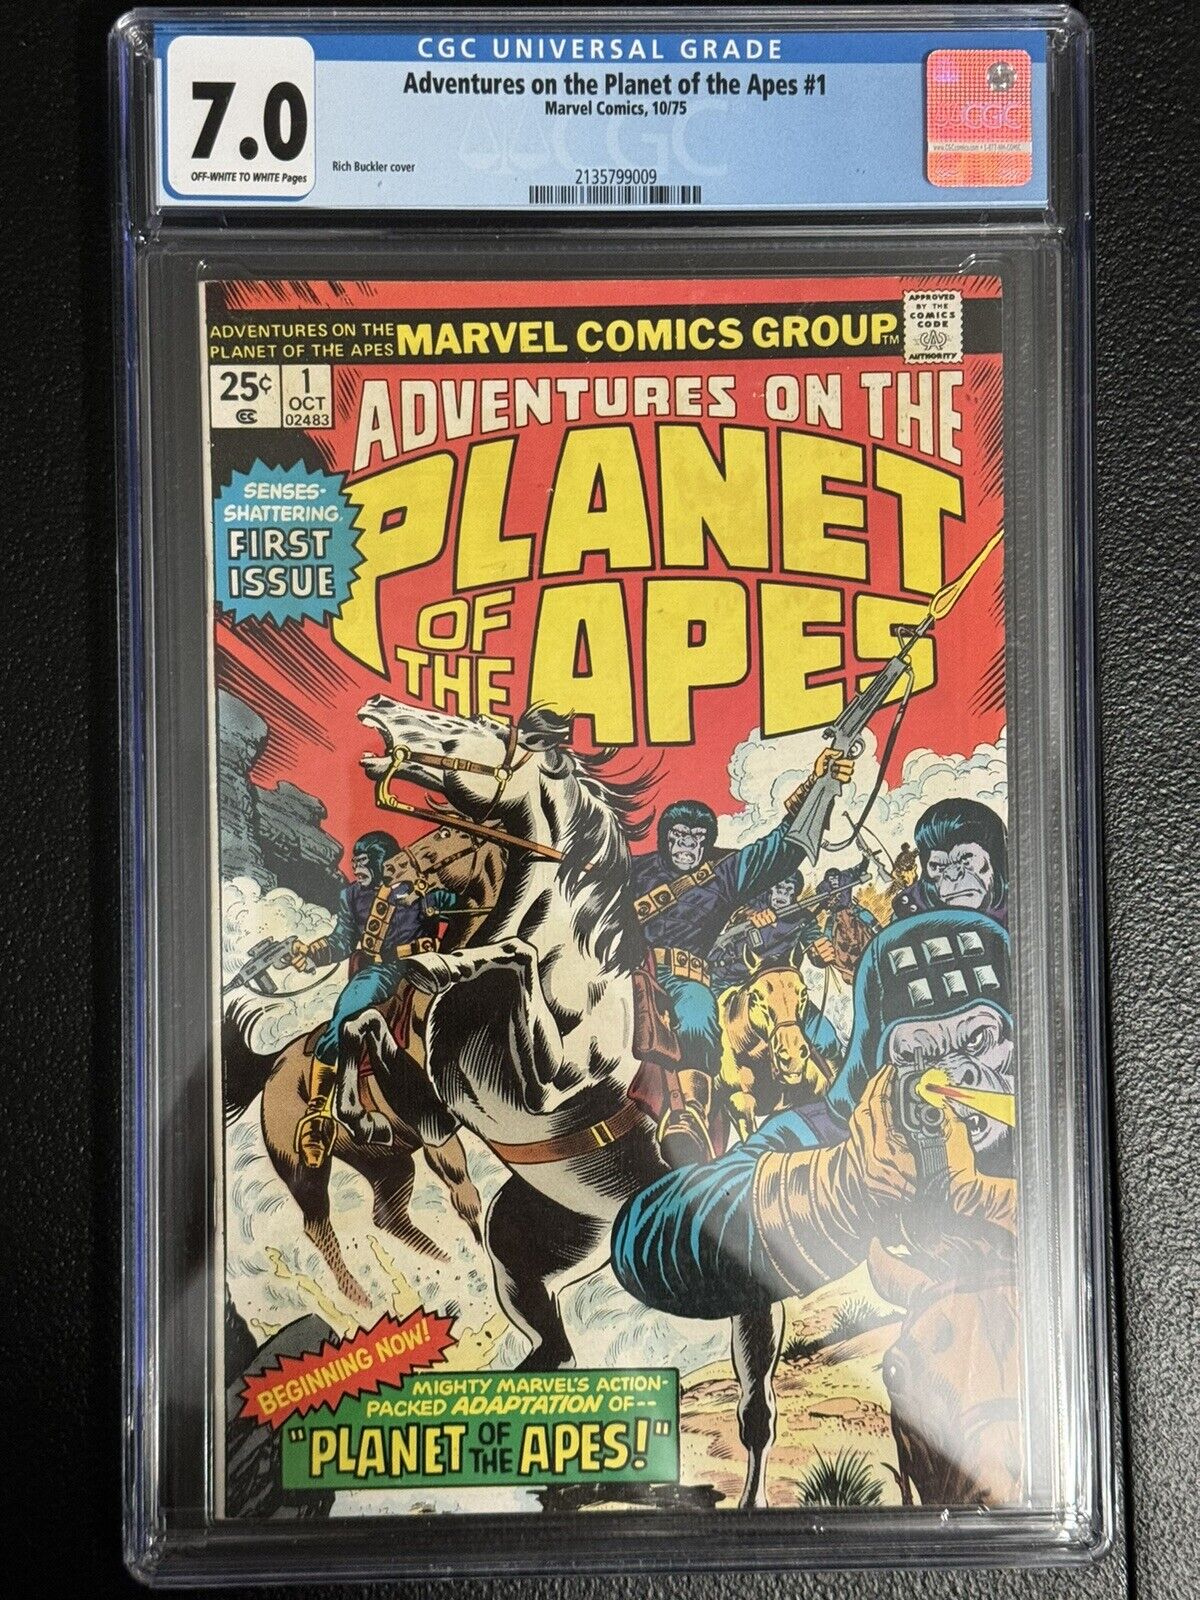 Marvel Comics 1975, Adventures on the Planet of the Apes #1, FN CGC 7.0